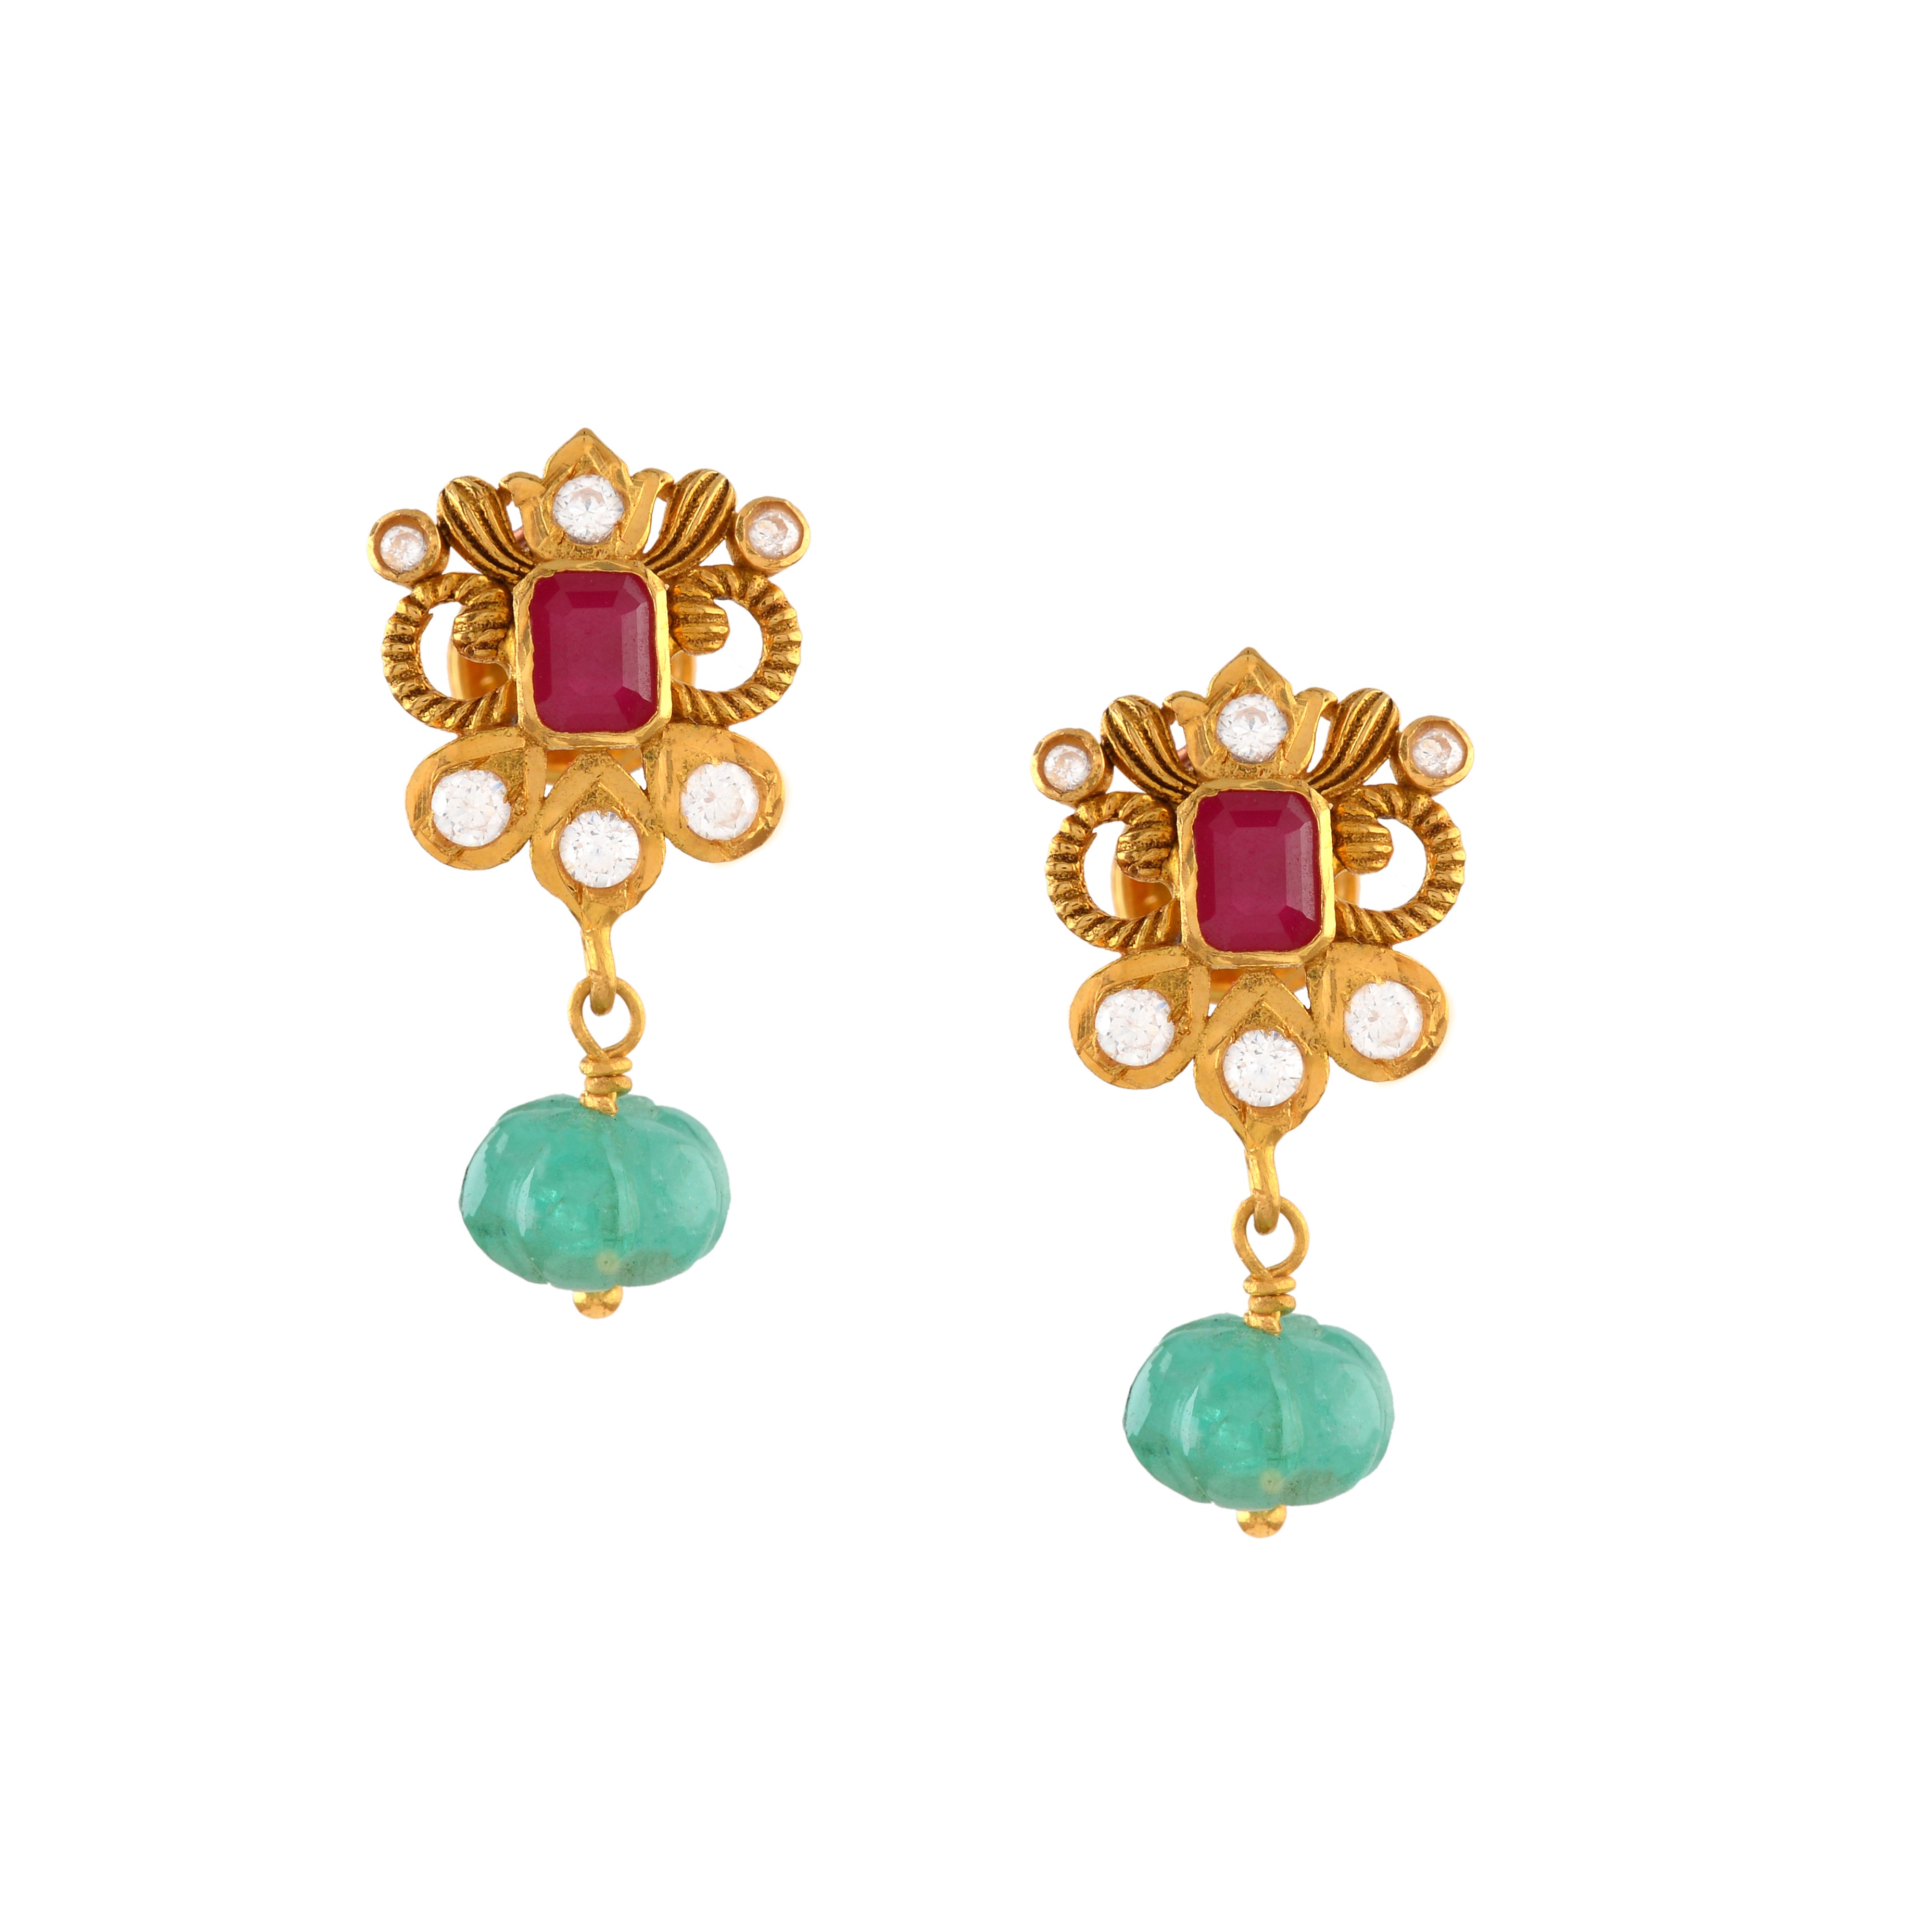 22K Gold Earrings With Karbuja Emerald Beads